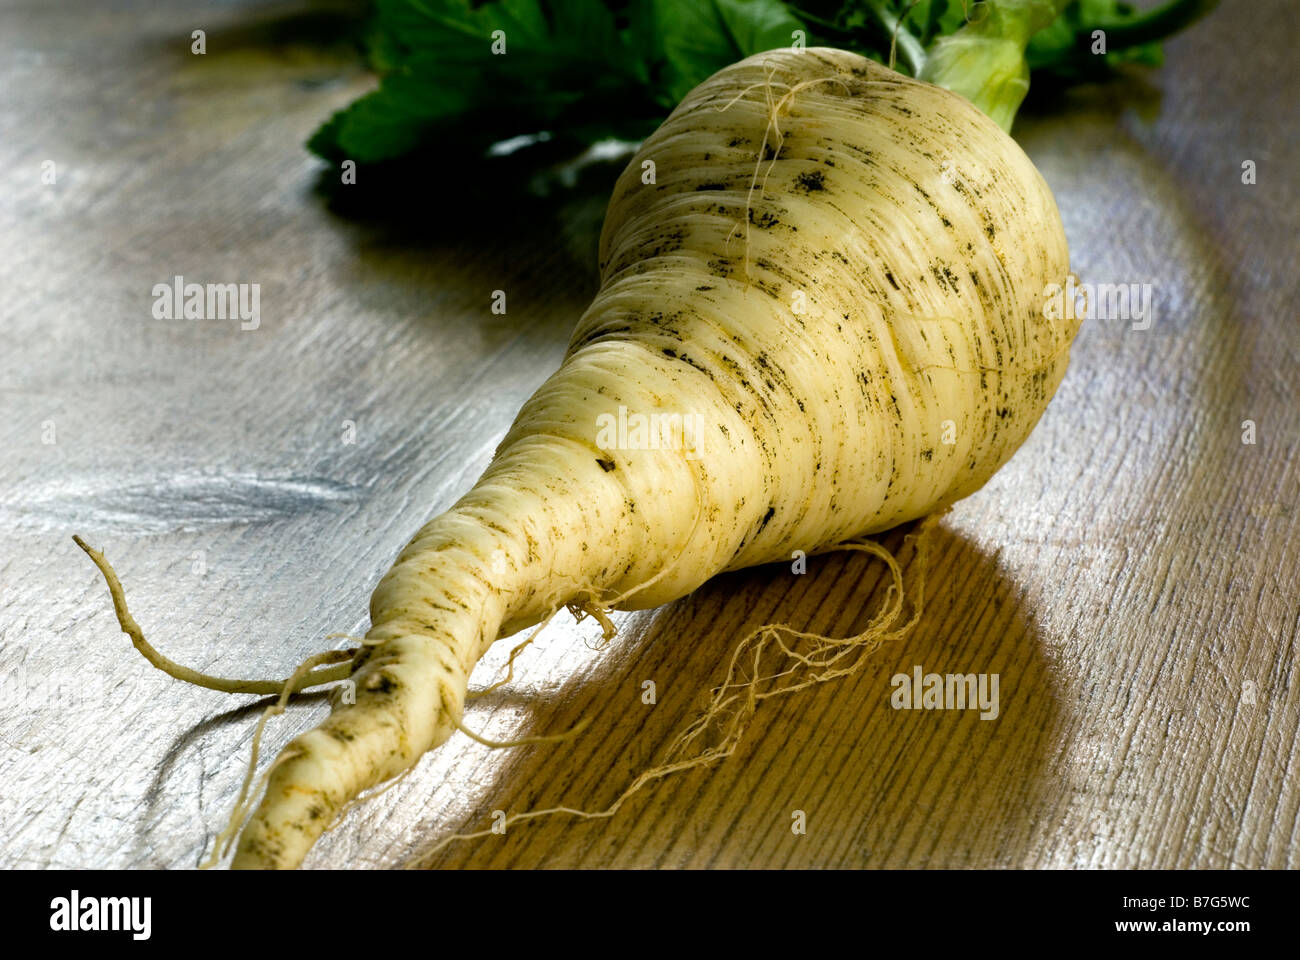 A FRESHLY  PULLED PARSNIP COMPLETE WITH LEAVES AND EARTH SHOT ON A WOODEN KITCHEN TABLE Stock Photo